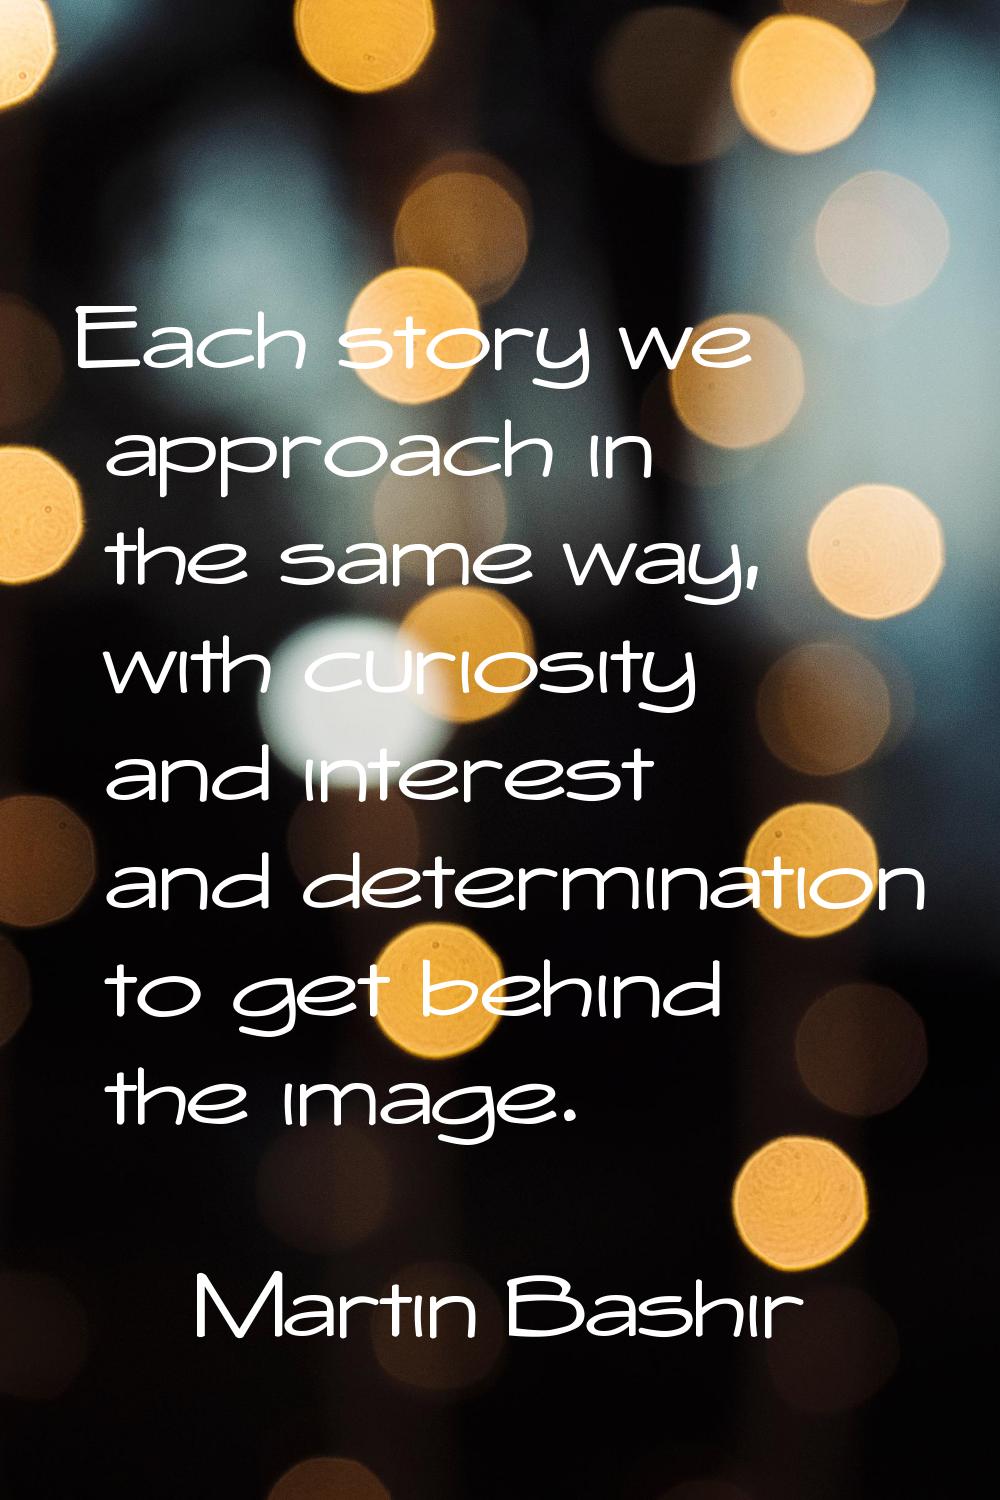 Each story we approach in the same way, with curiosity and interest and determination to get behind